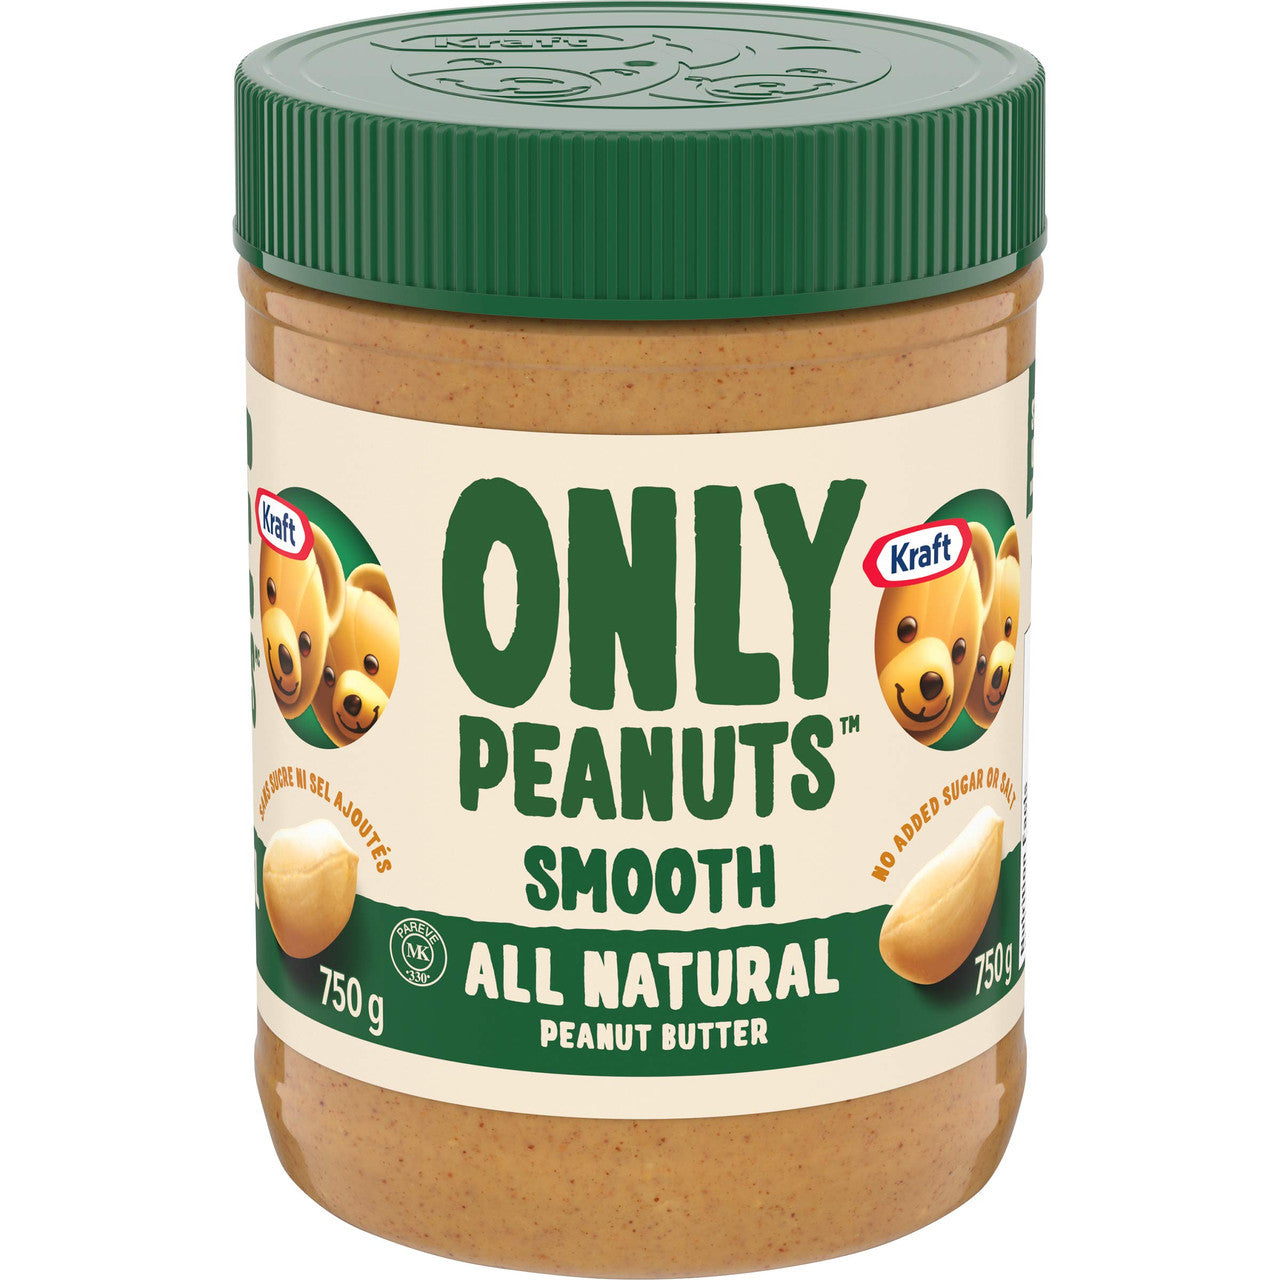 Kraft Peanut Butter, All Natural Smooth, 750g/26.5 oz. (Pack of 12) {Imported from Canada}